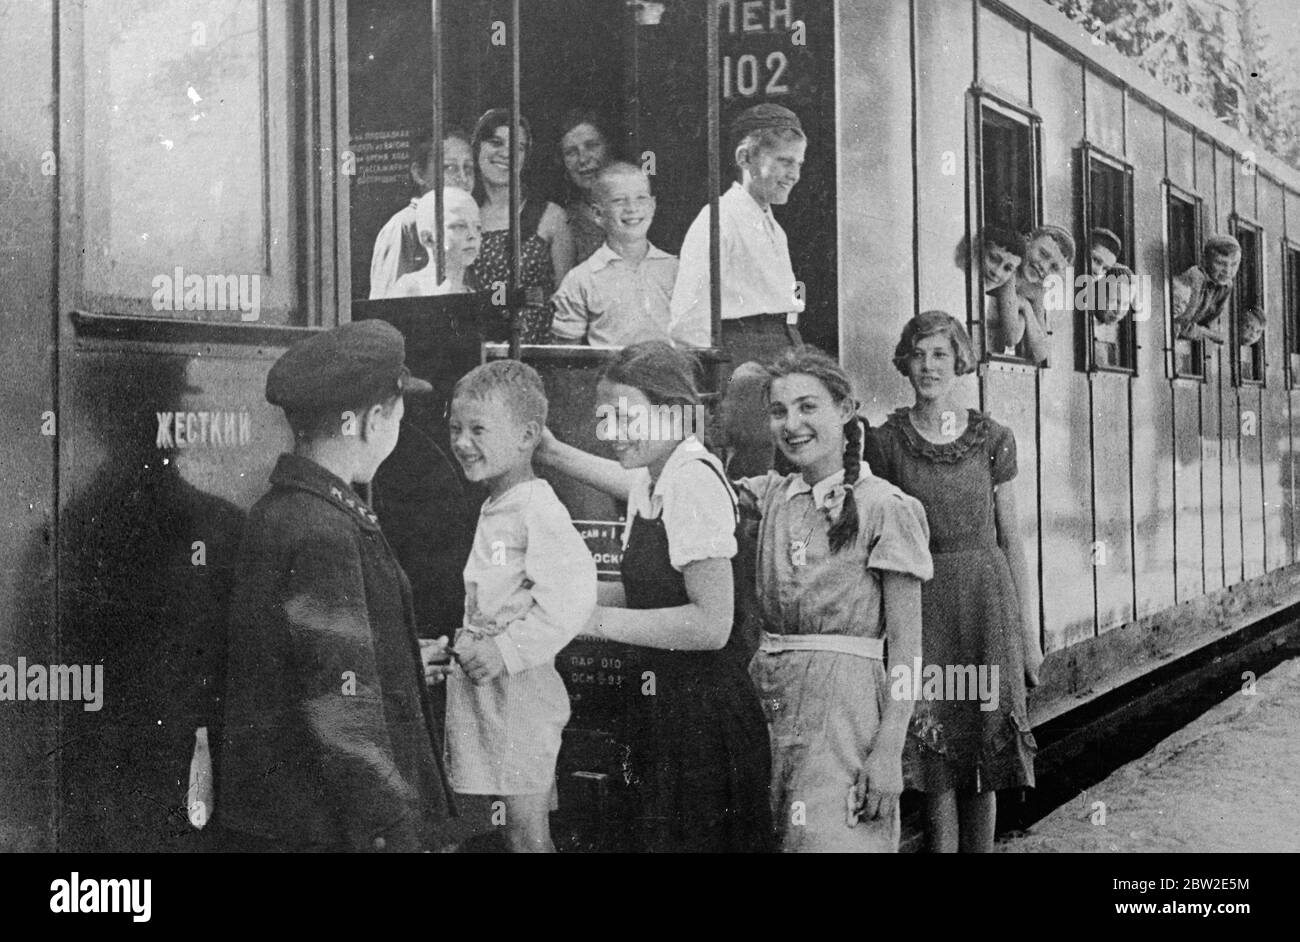 One of the poorly conductors checking tickets of charge passengers as they board the train. The only railway worked entirely by children is in service in the Soviet Union only 25 miles from Moscow. The children carry out all the duties on the railway, the miniature system serves a useful purpose for it makes youngsters familiar with railway technique. 25 July 1937 Stock Photo